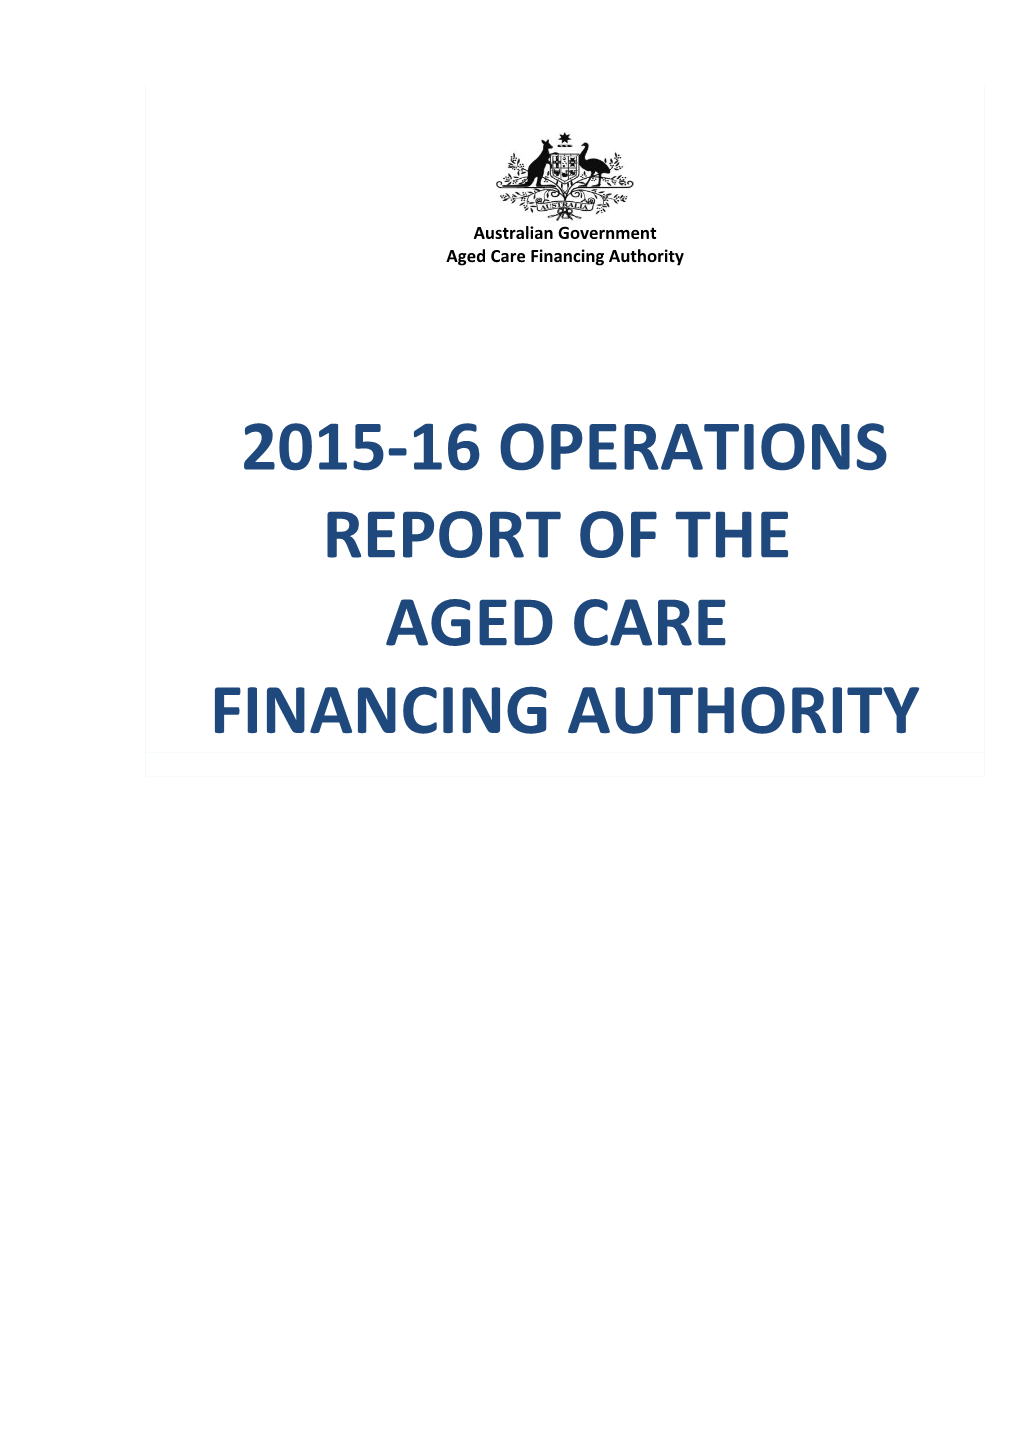 2015-16 Operations Report of the Aged Care Financing Authority